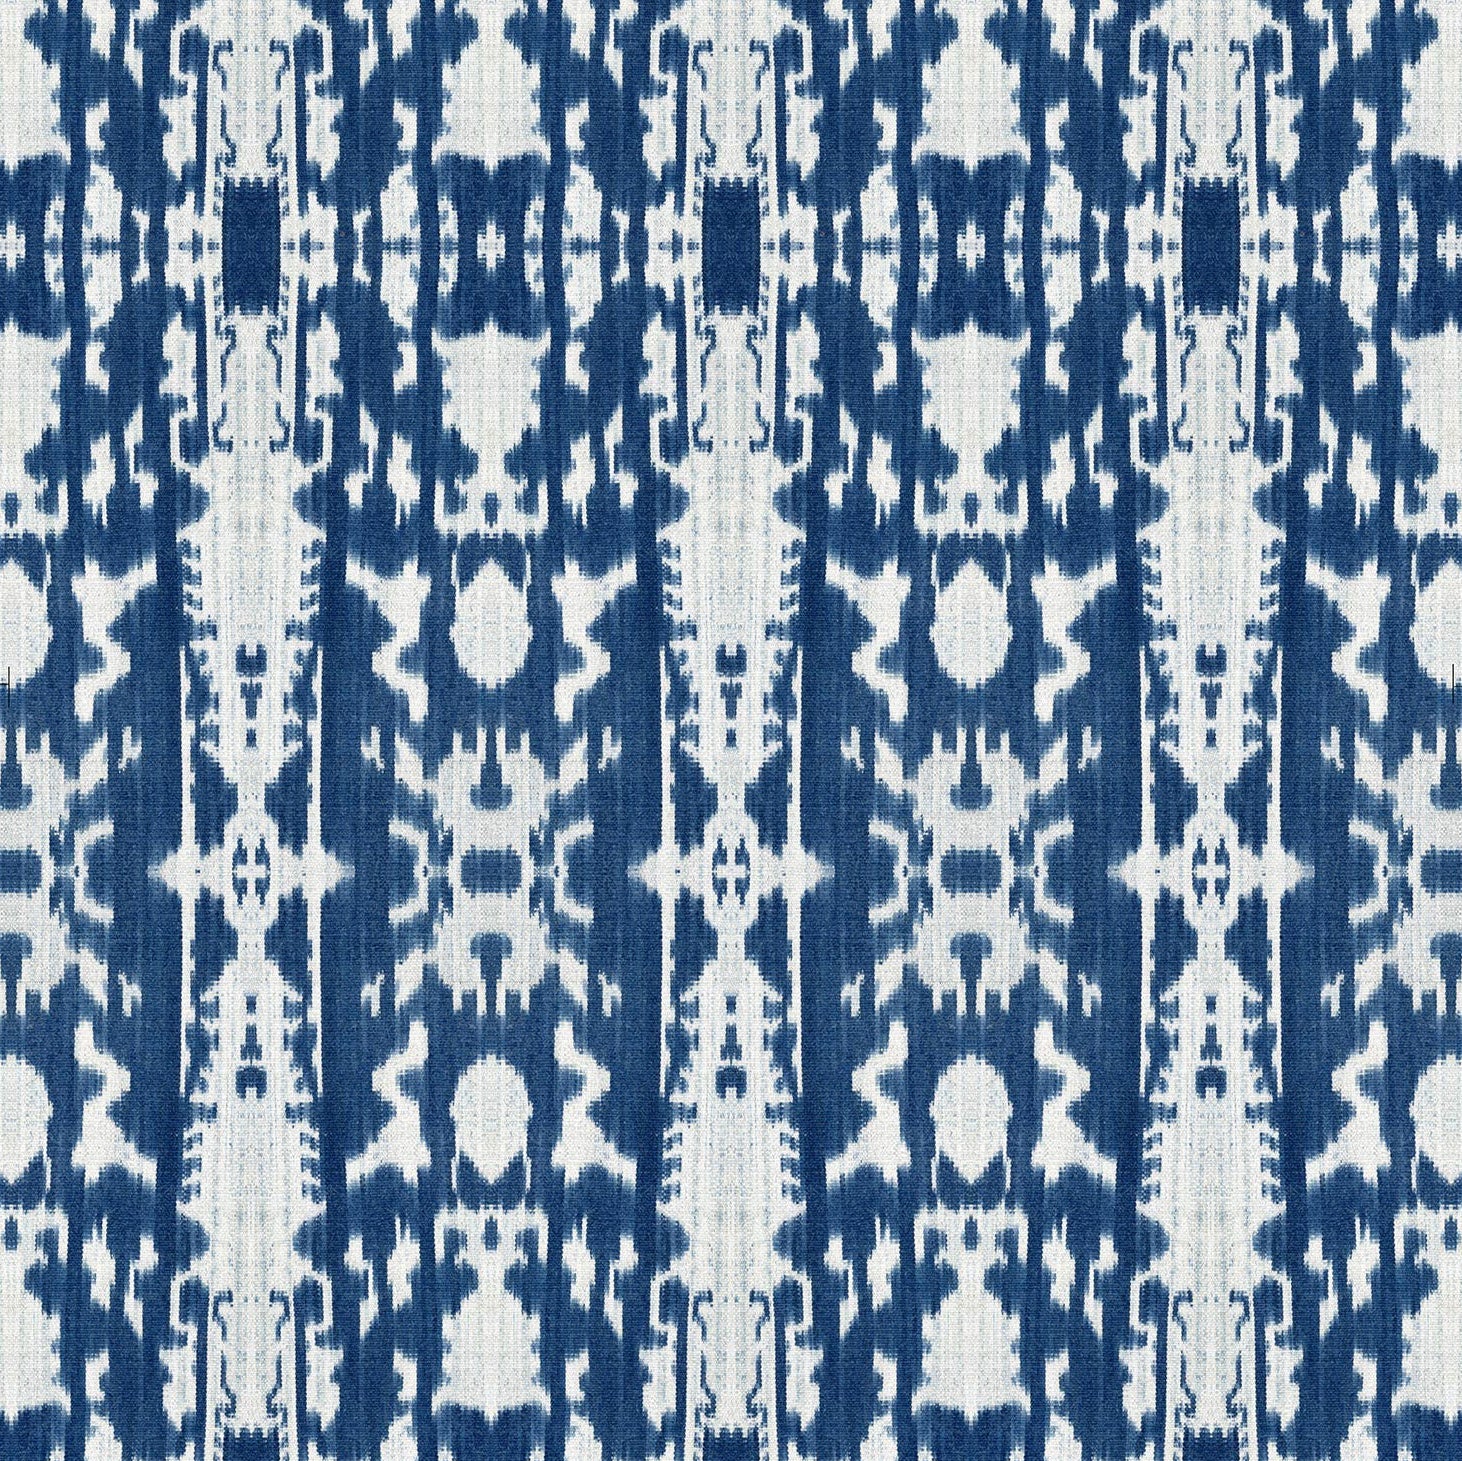 Detail of wallpaper in a painterly ikat print in blue and white.